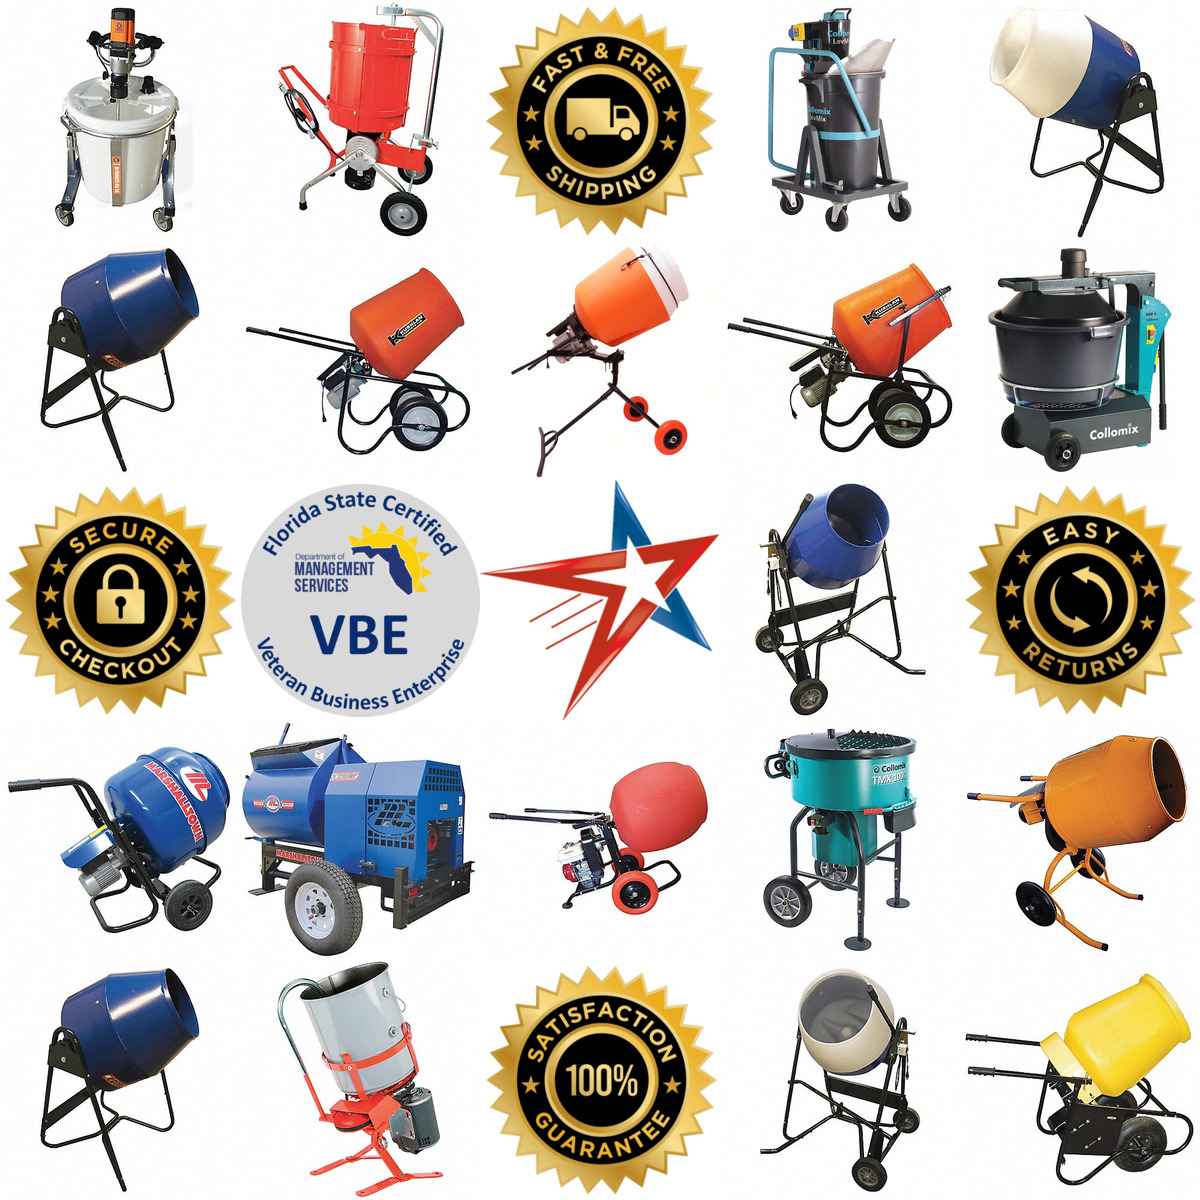 A selection of Concrete Mixers products on GoVets